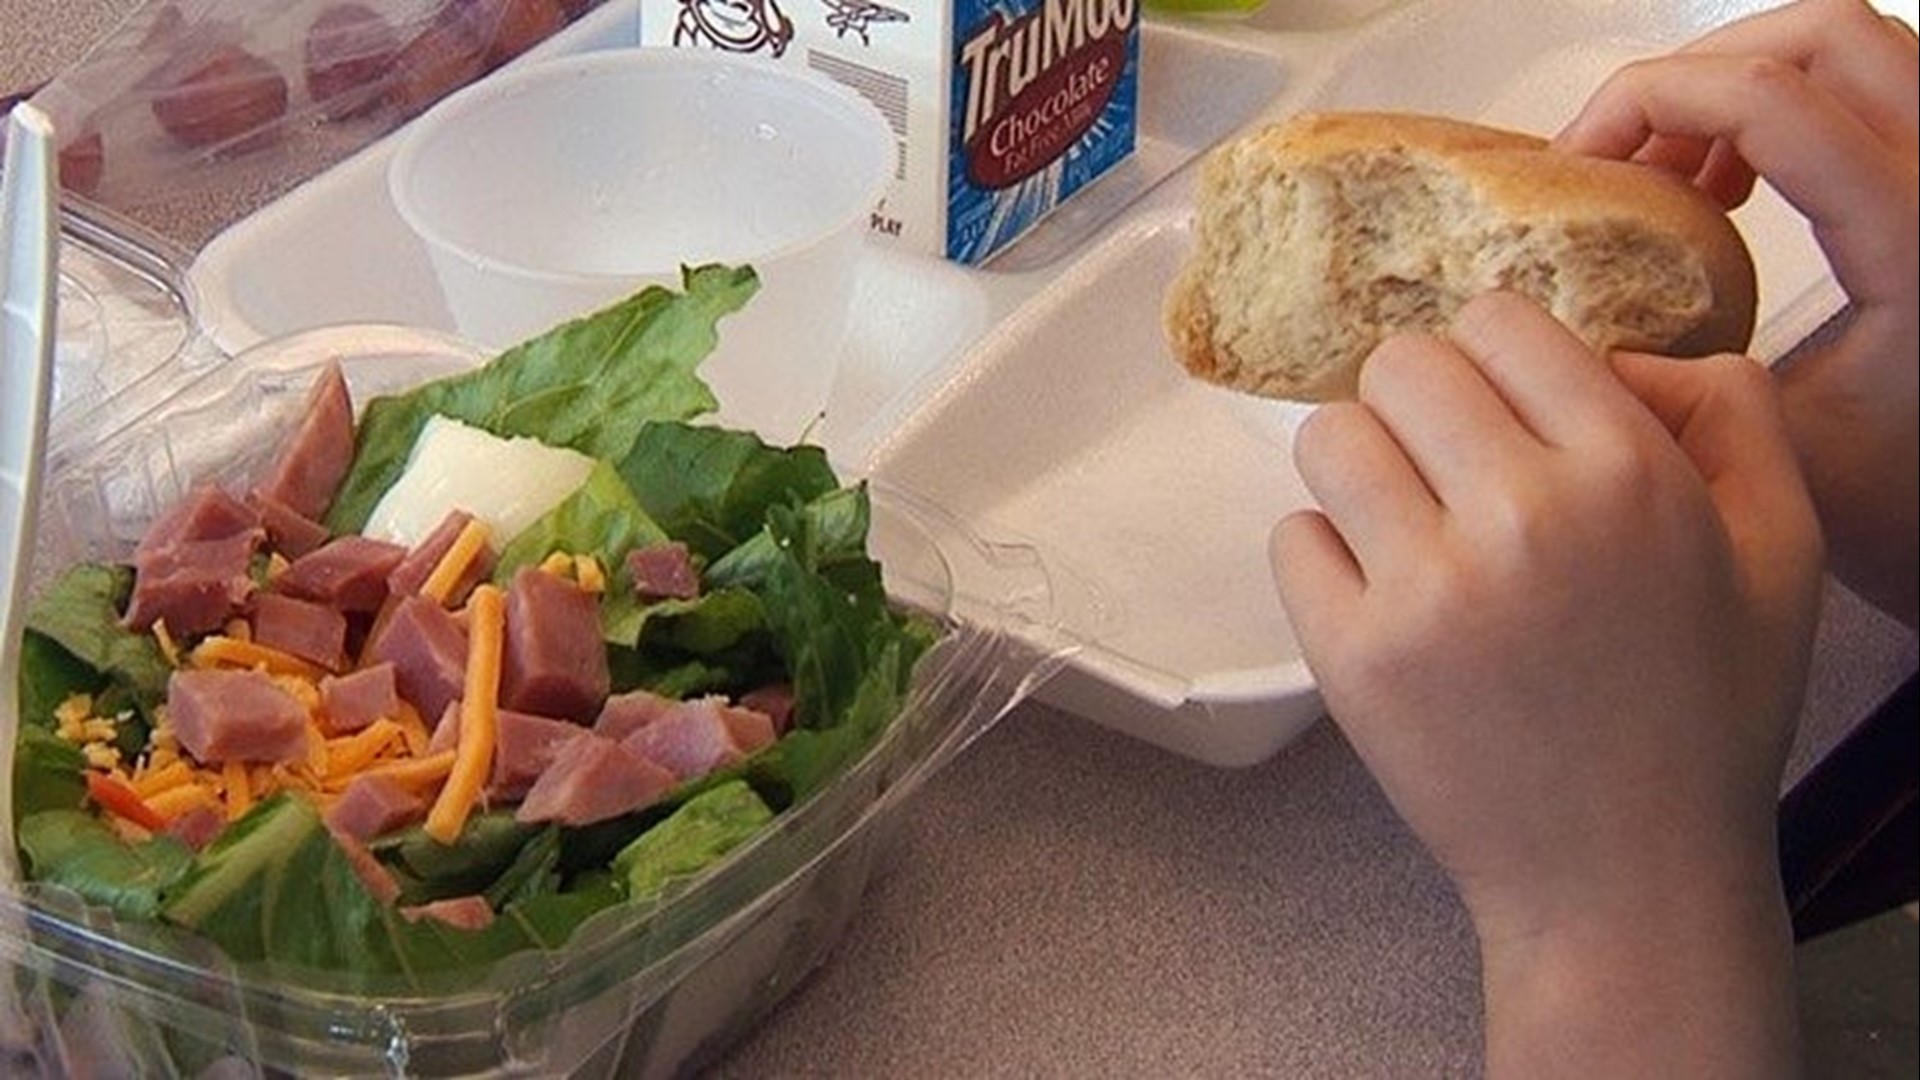 Waco ISD is offering free breakfast and lunch to kids as part of its annual summer food service program.